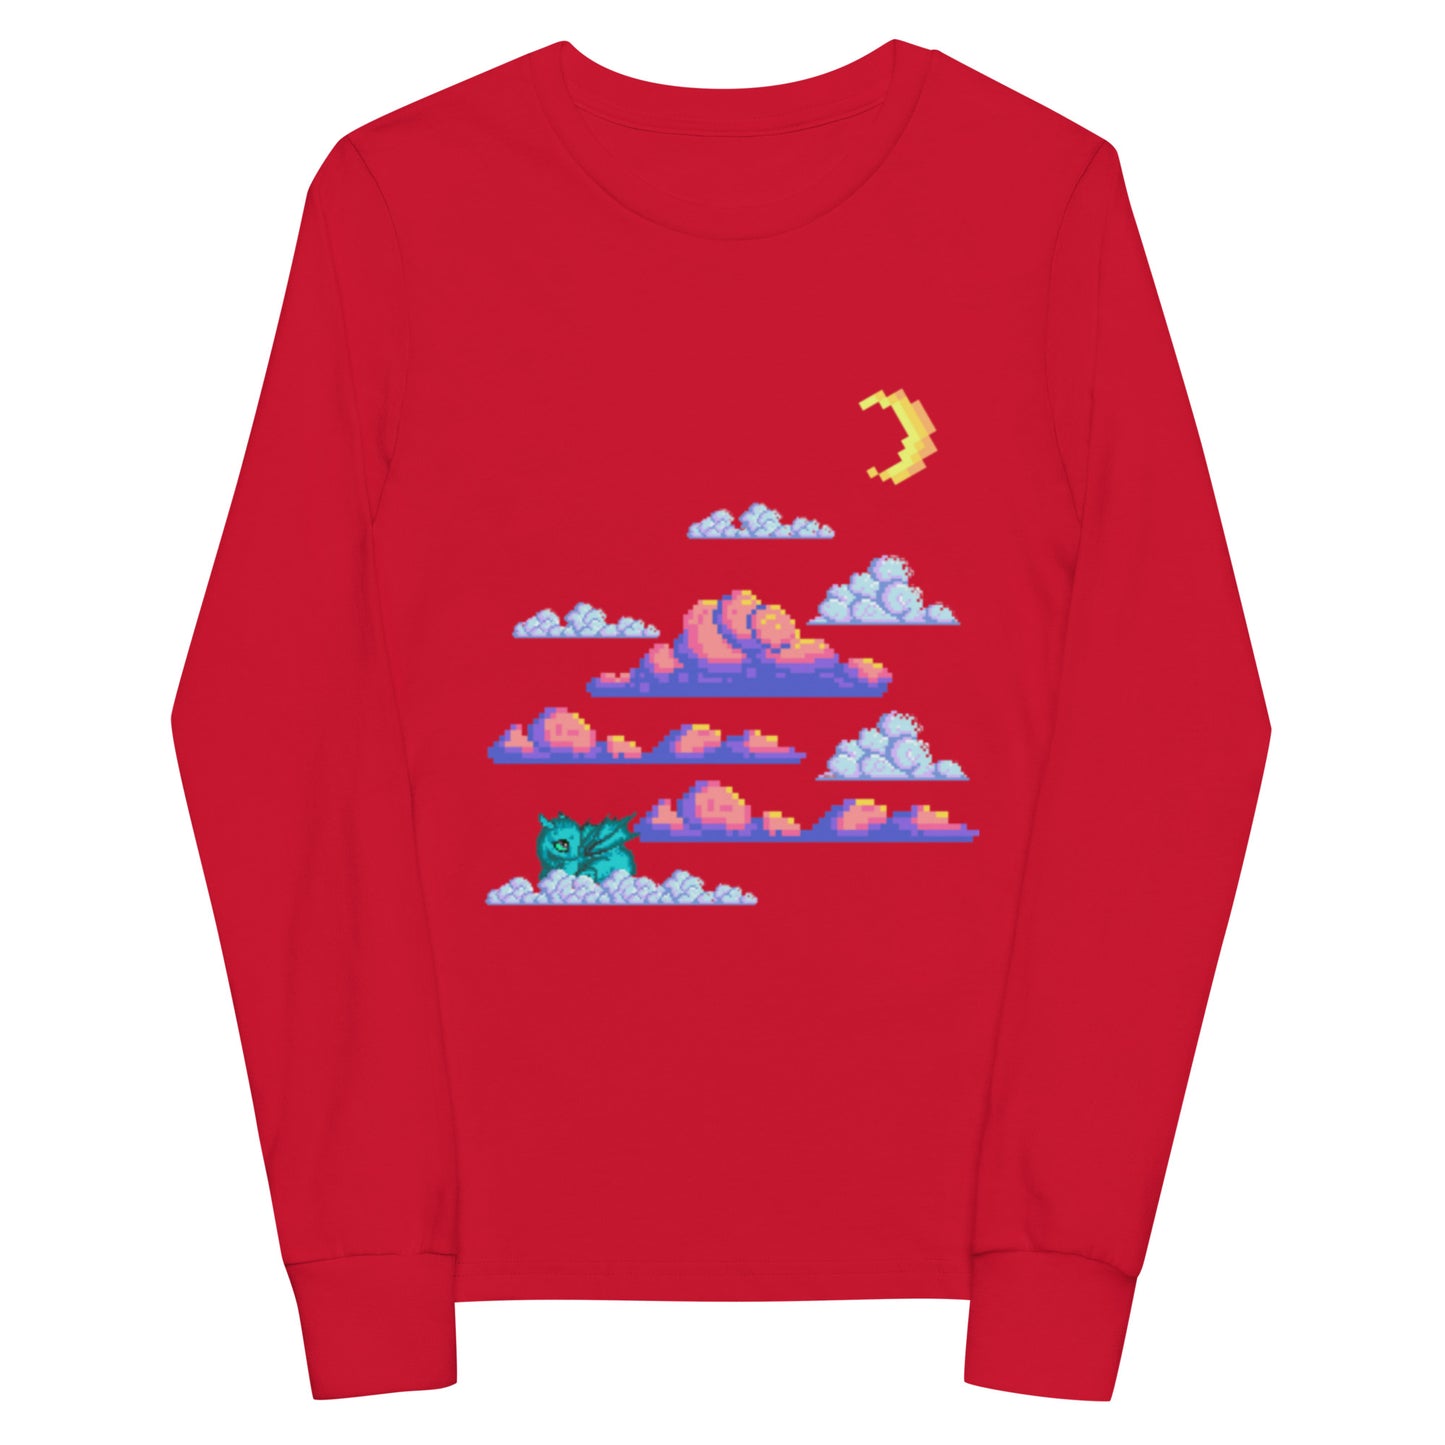 Youth long sleeve pixel clouds tee